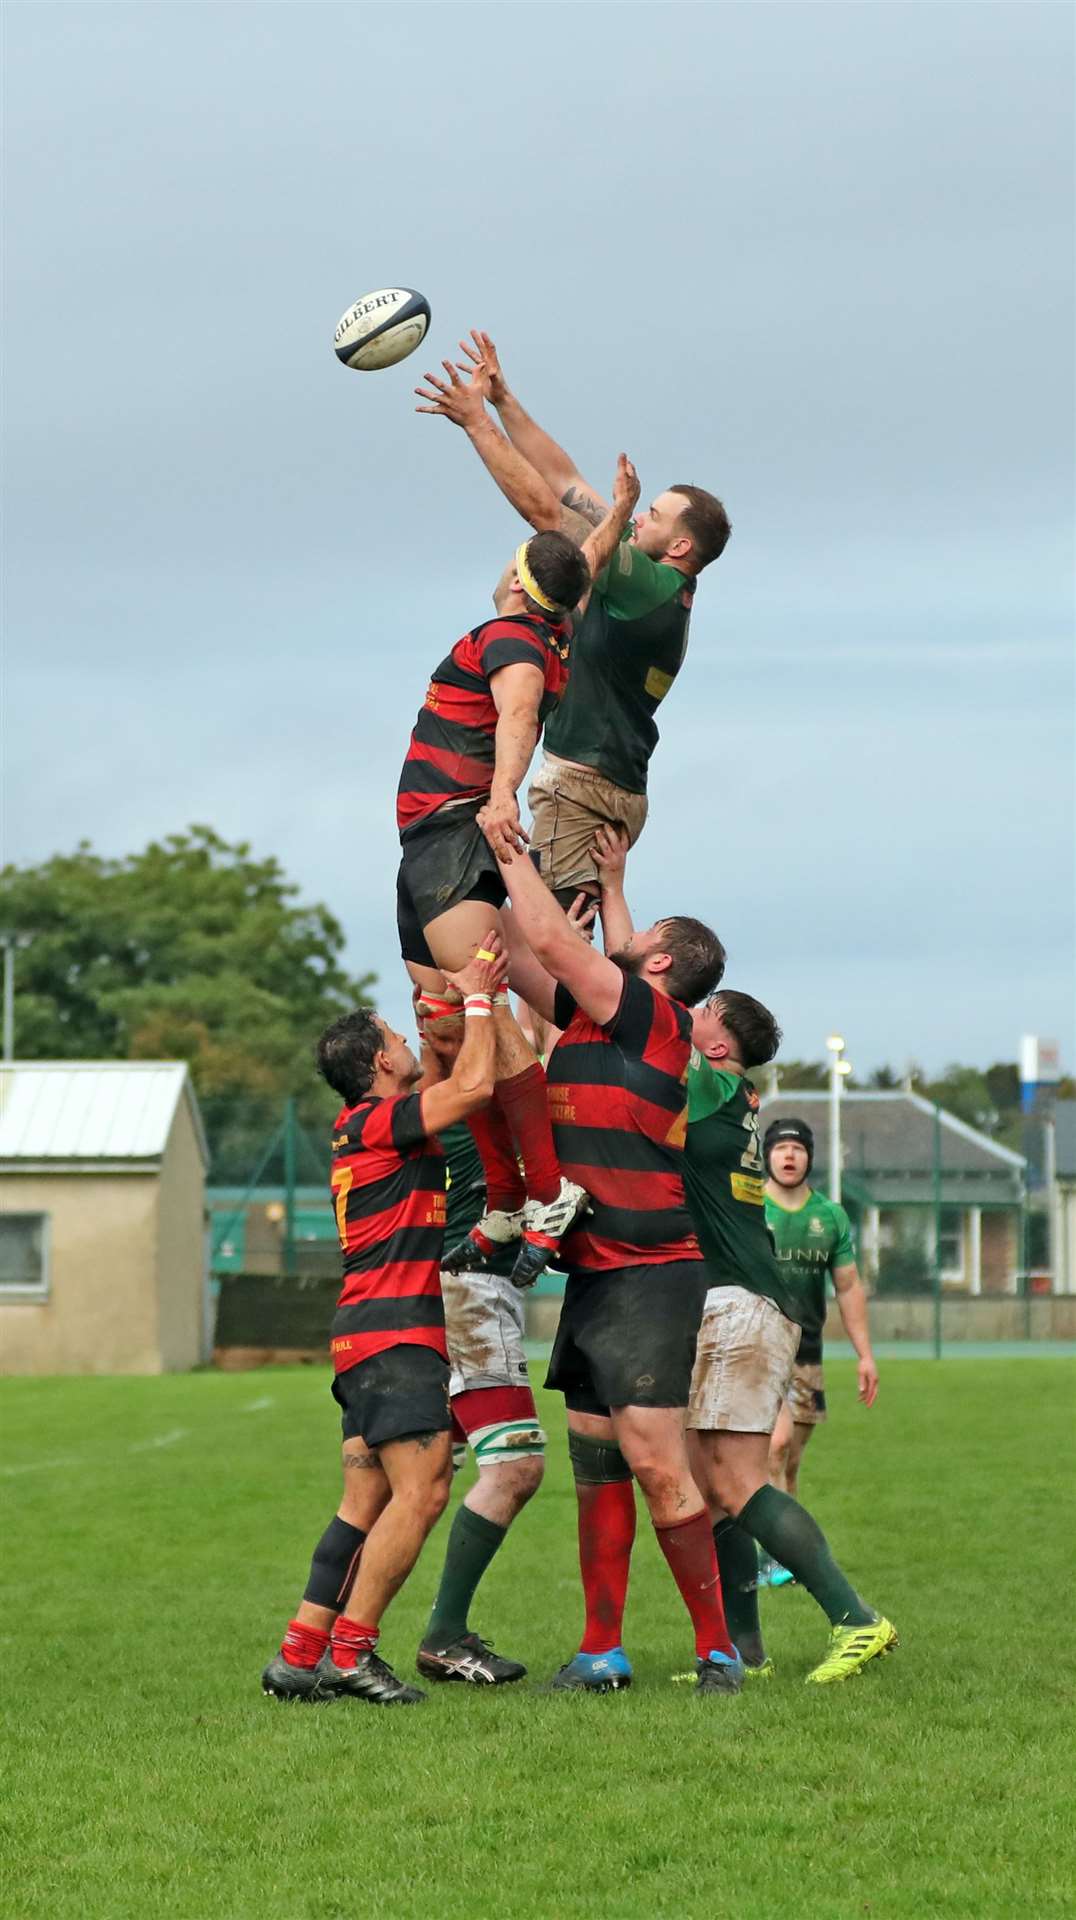 Grant Anderson wins a lineout ball for Caithness in their win against Grangemouth. Picture: James Gunn